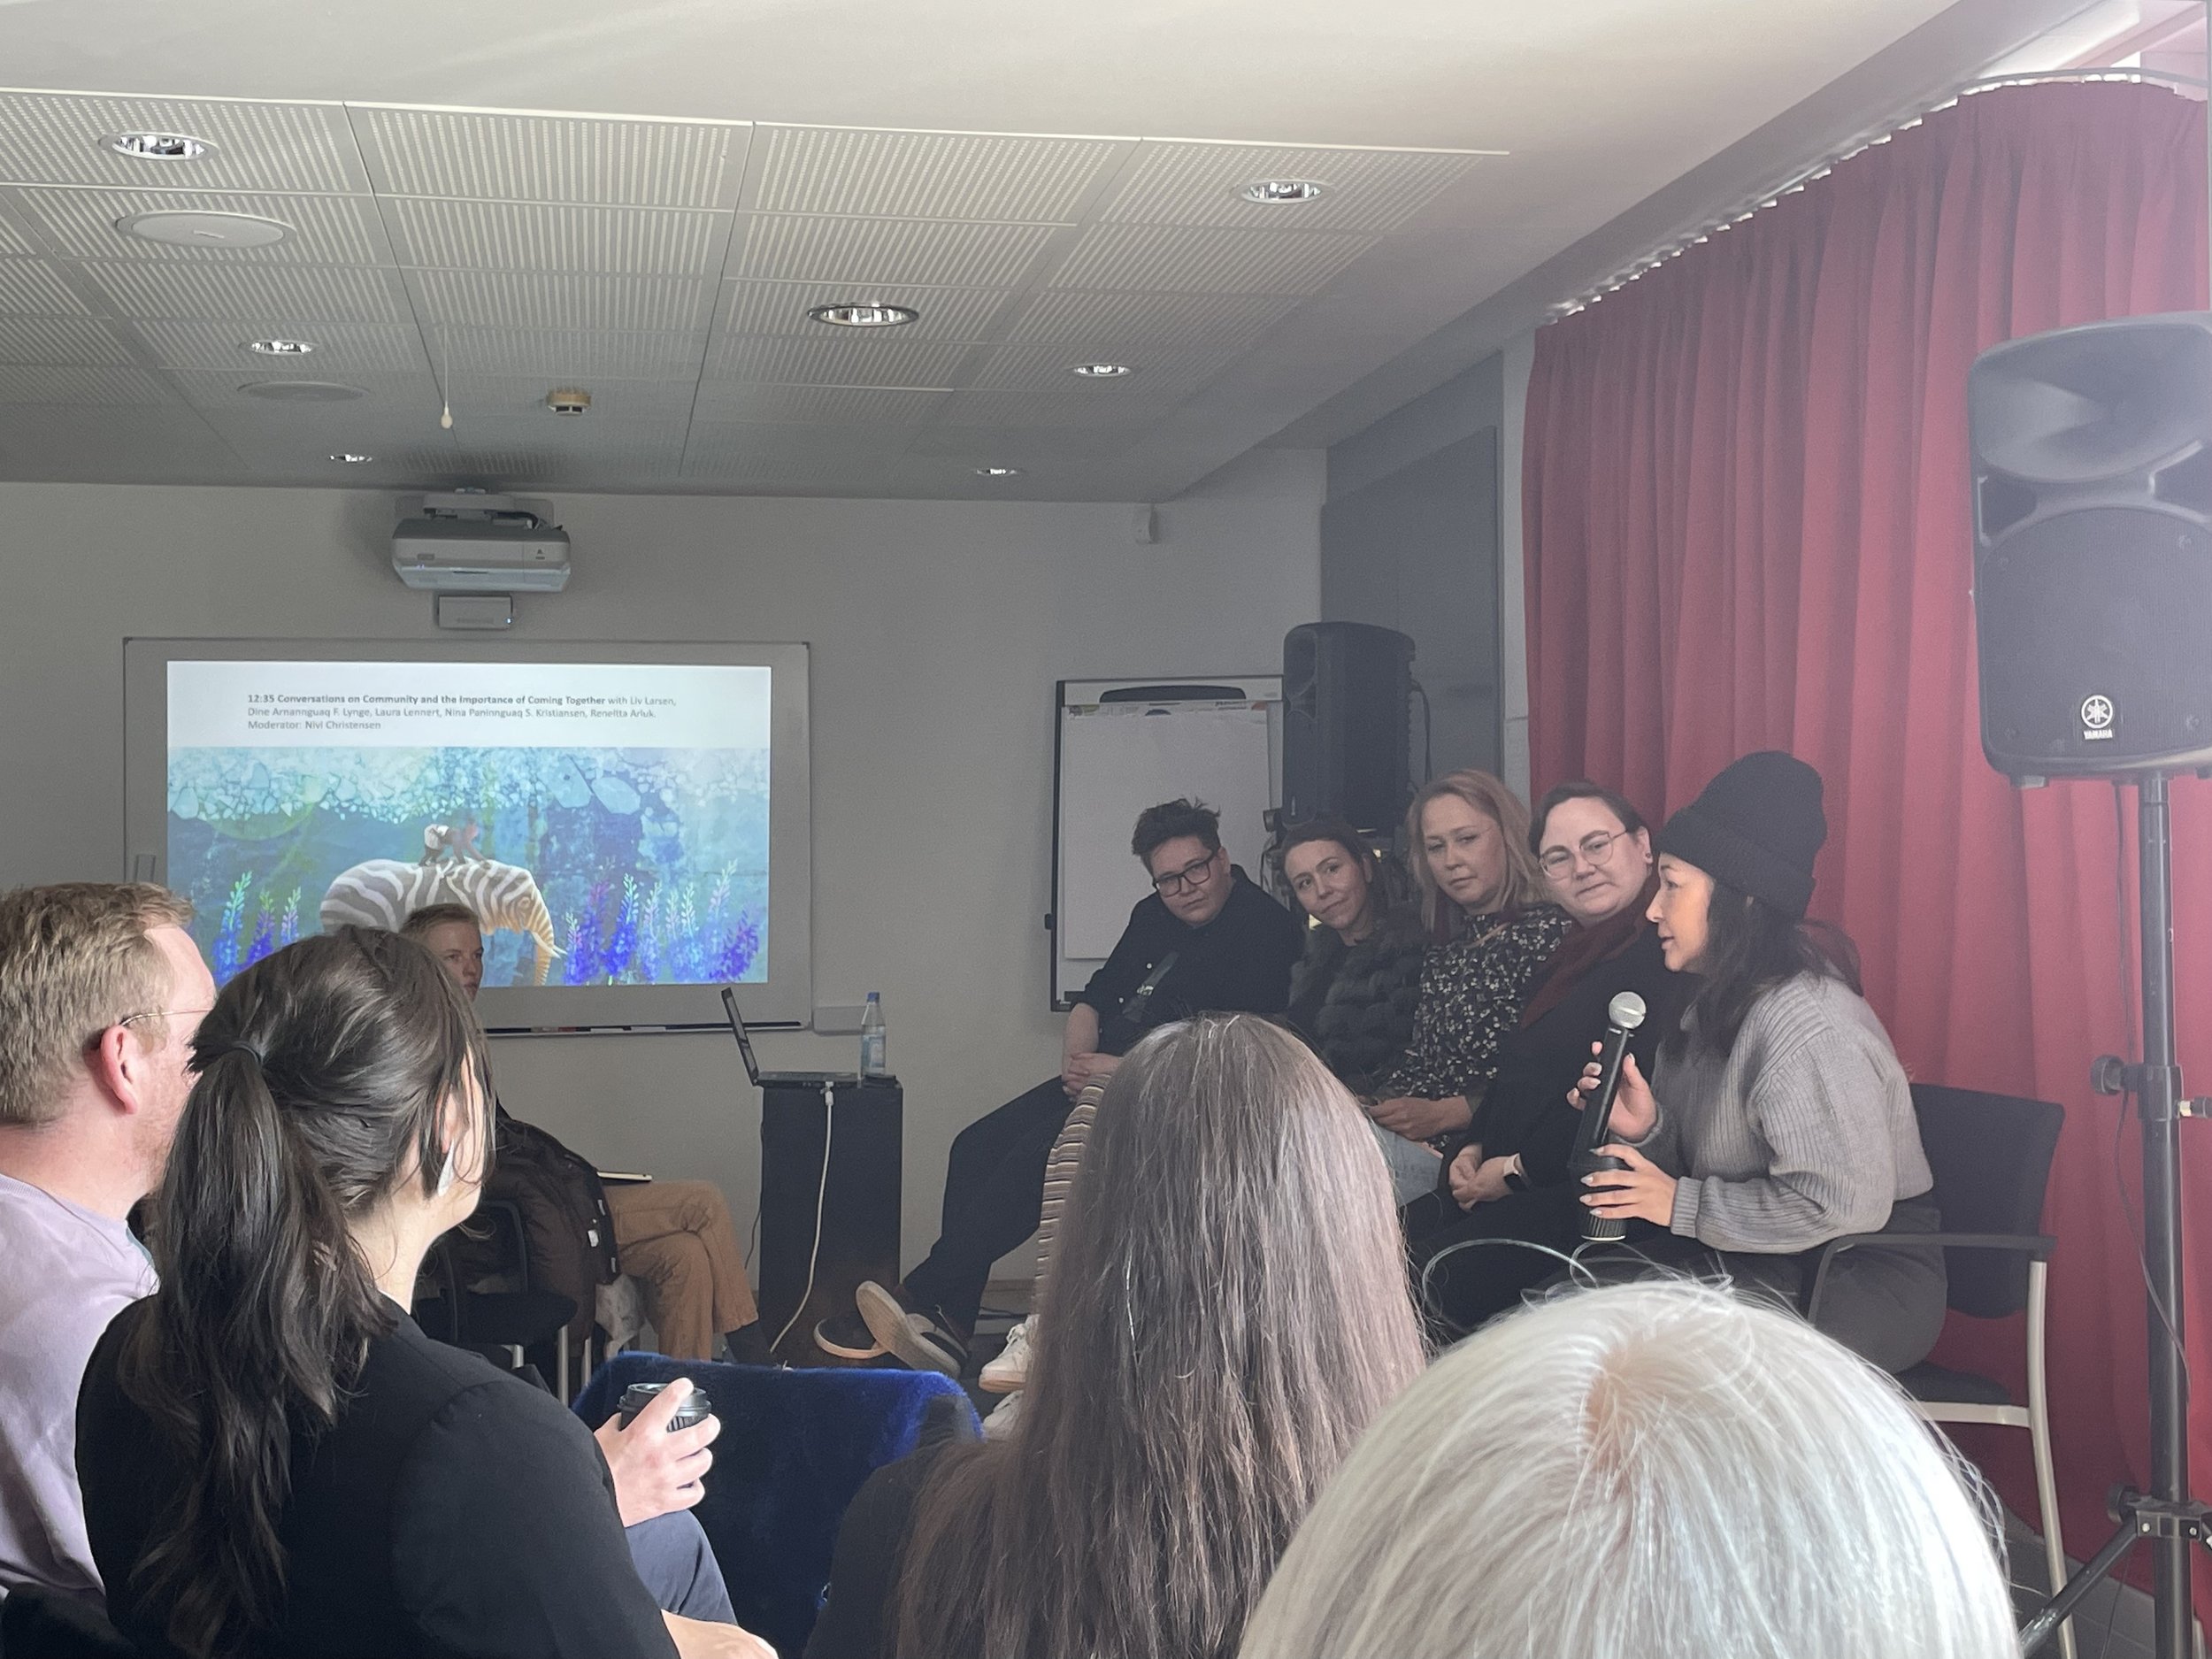   Inuit Futures  Mentor, Reneltta Arluk, speaks during  a panel on “Conversations on Community and the Importance of Coming Together” as part-of the Nuuk Nordic Festival. Nuuk, Greenland. May 2023. Photograph by Danielle Miles.        